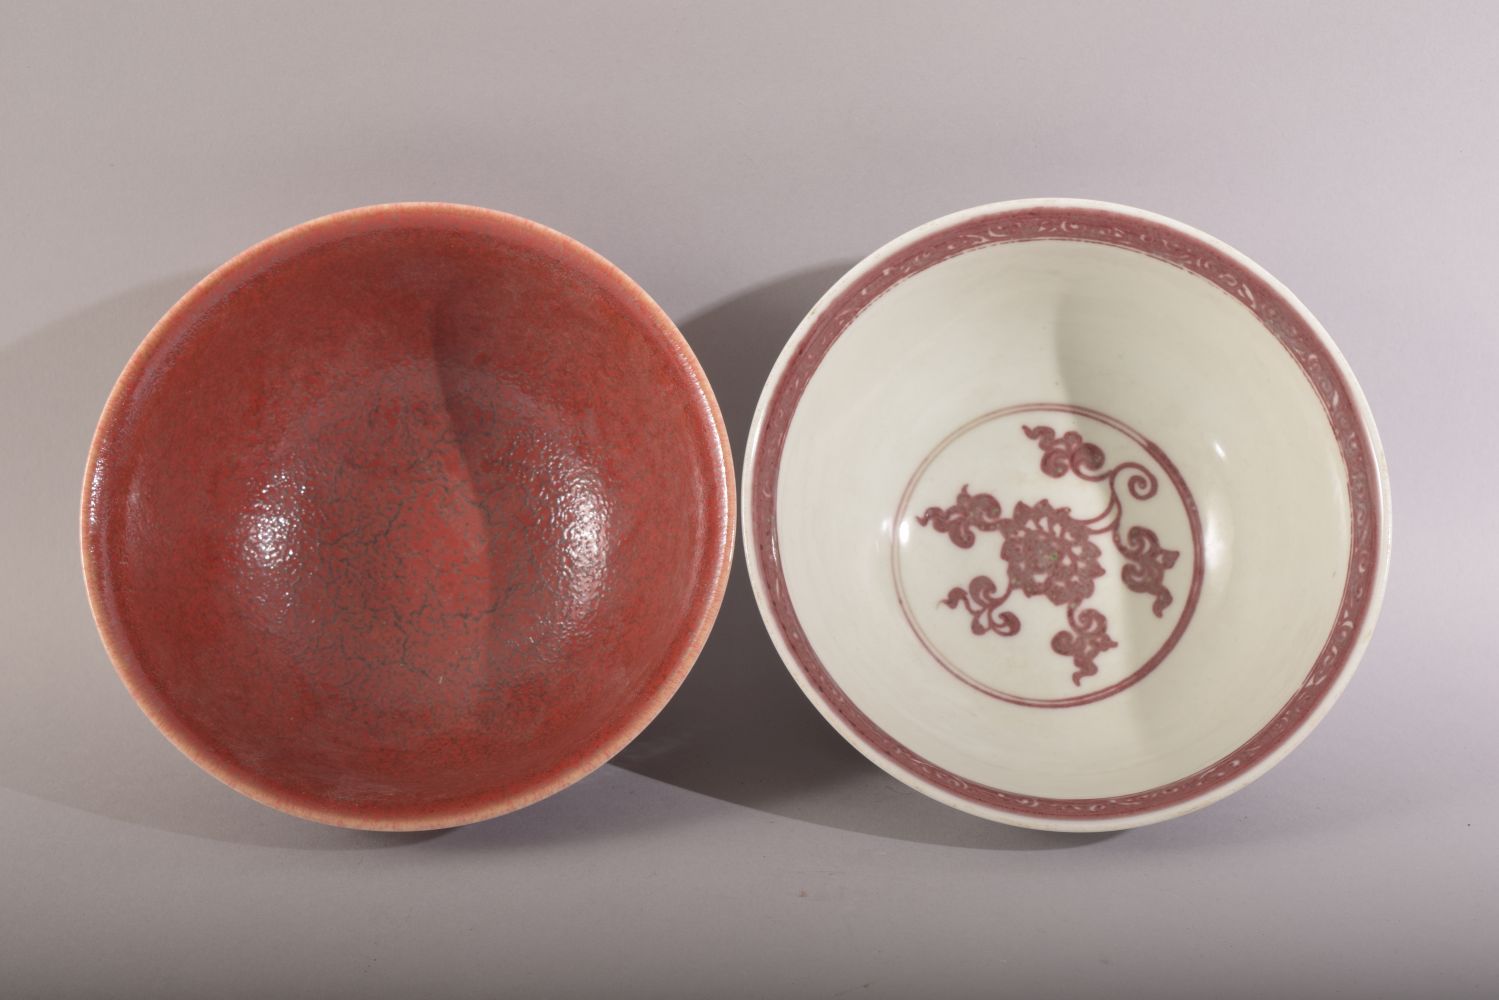 TWO CHINESE PORCELAIN BOWLS, one with red and white floral decoration, the other with red - Image 5 of 7